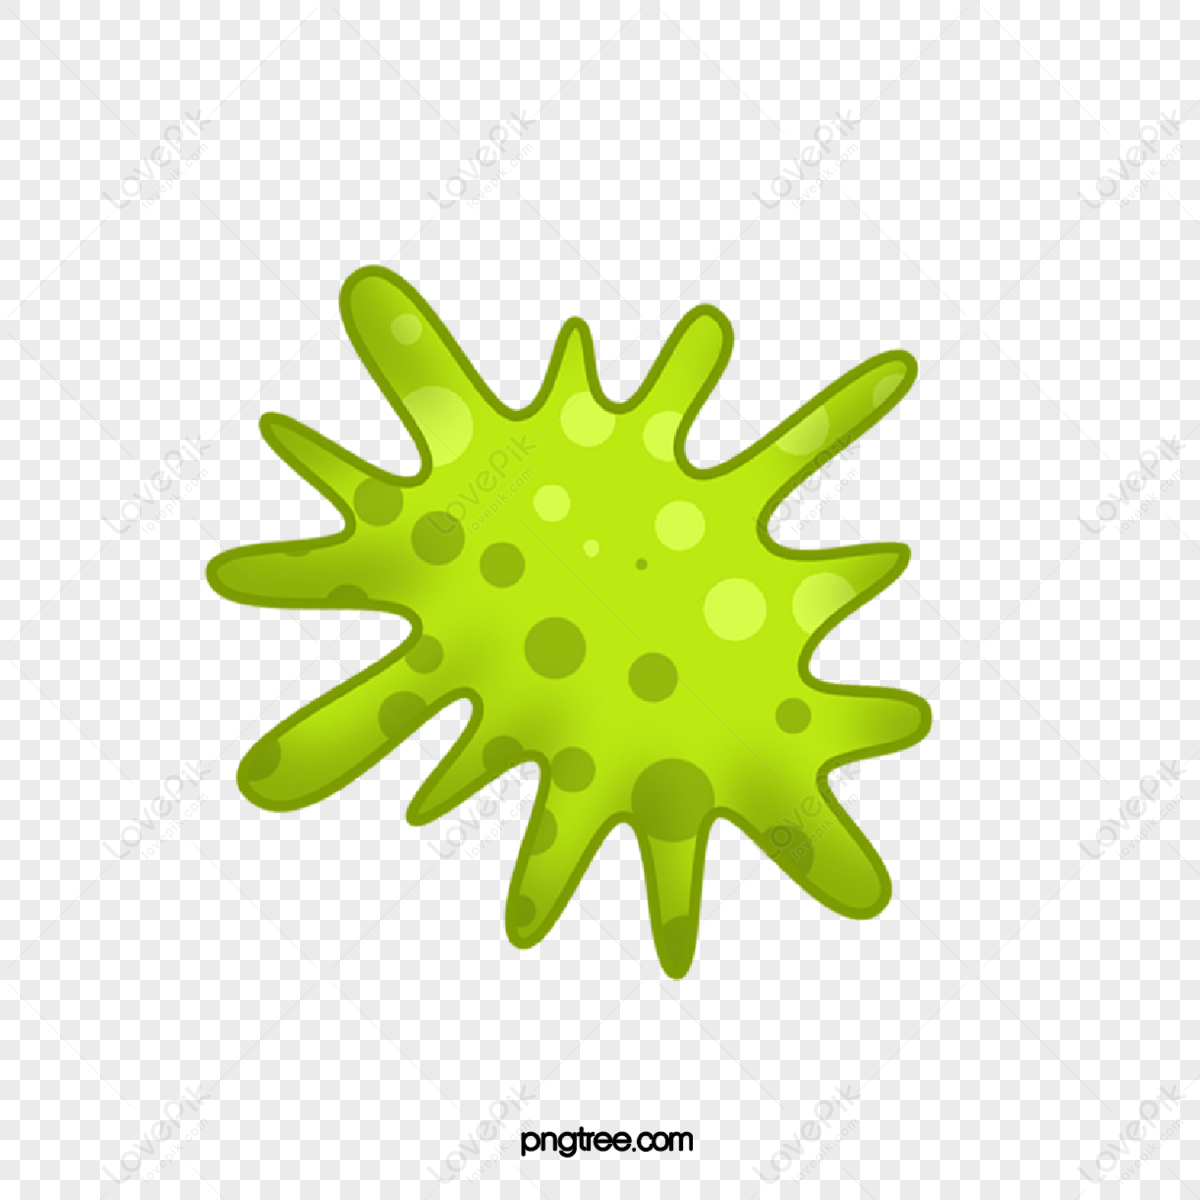 Slime transparent background PNG cliparts free download